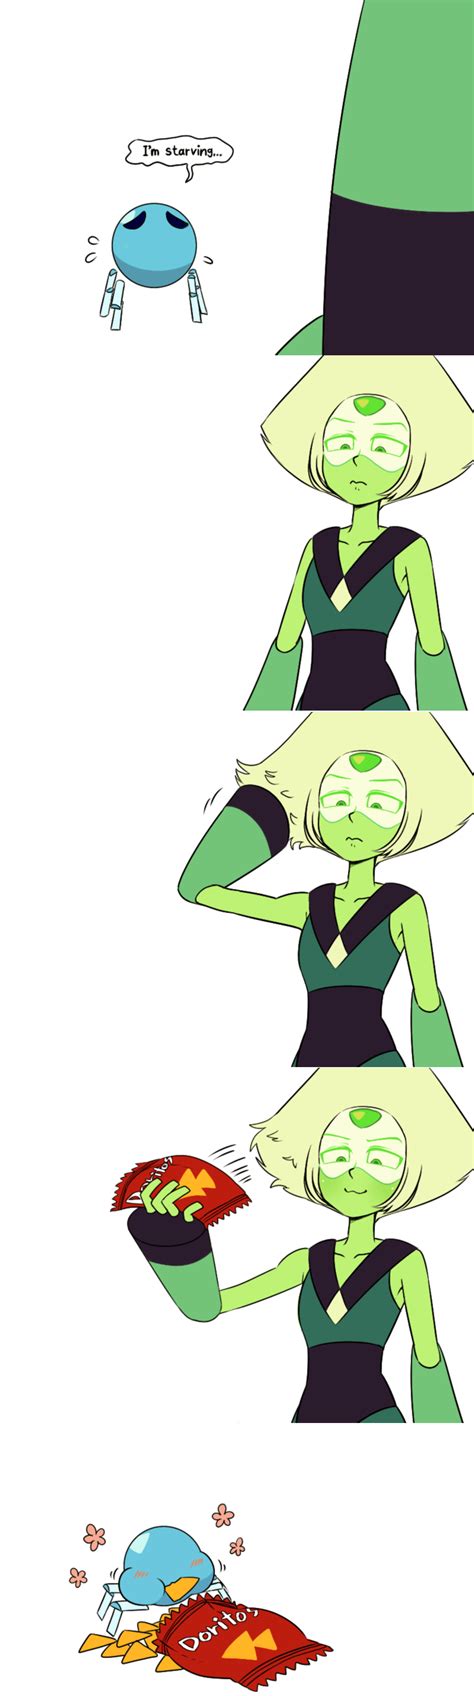 aw steven universe know your meme